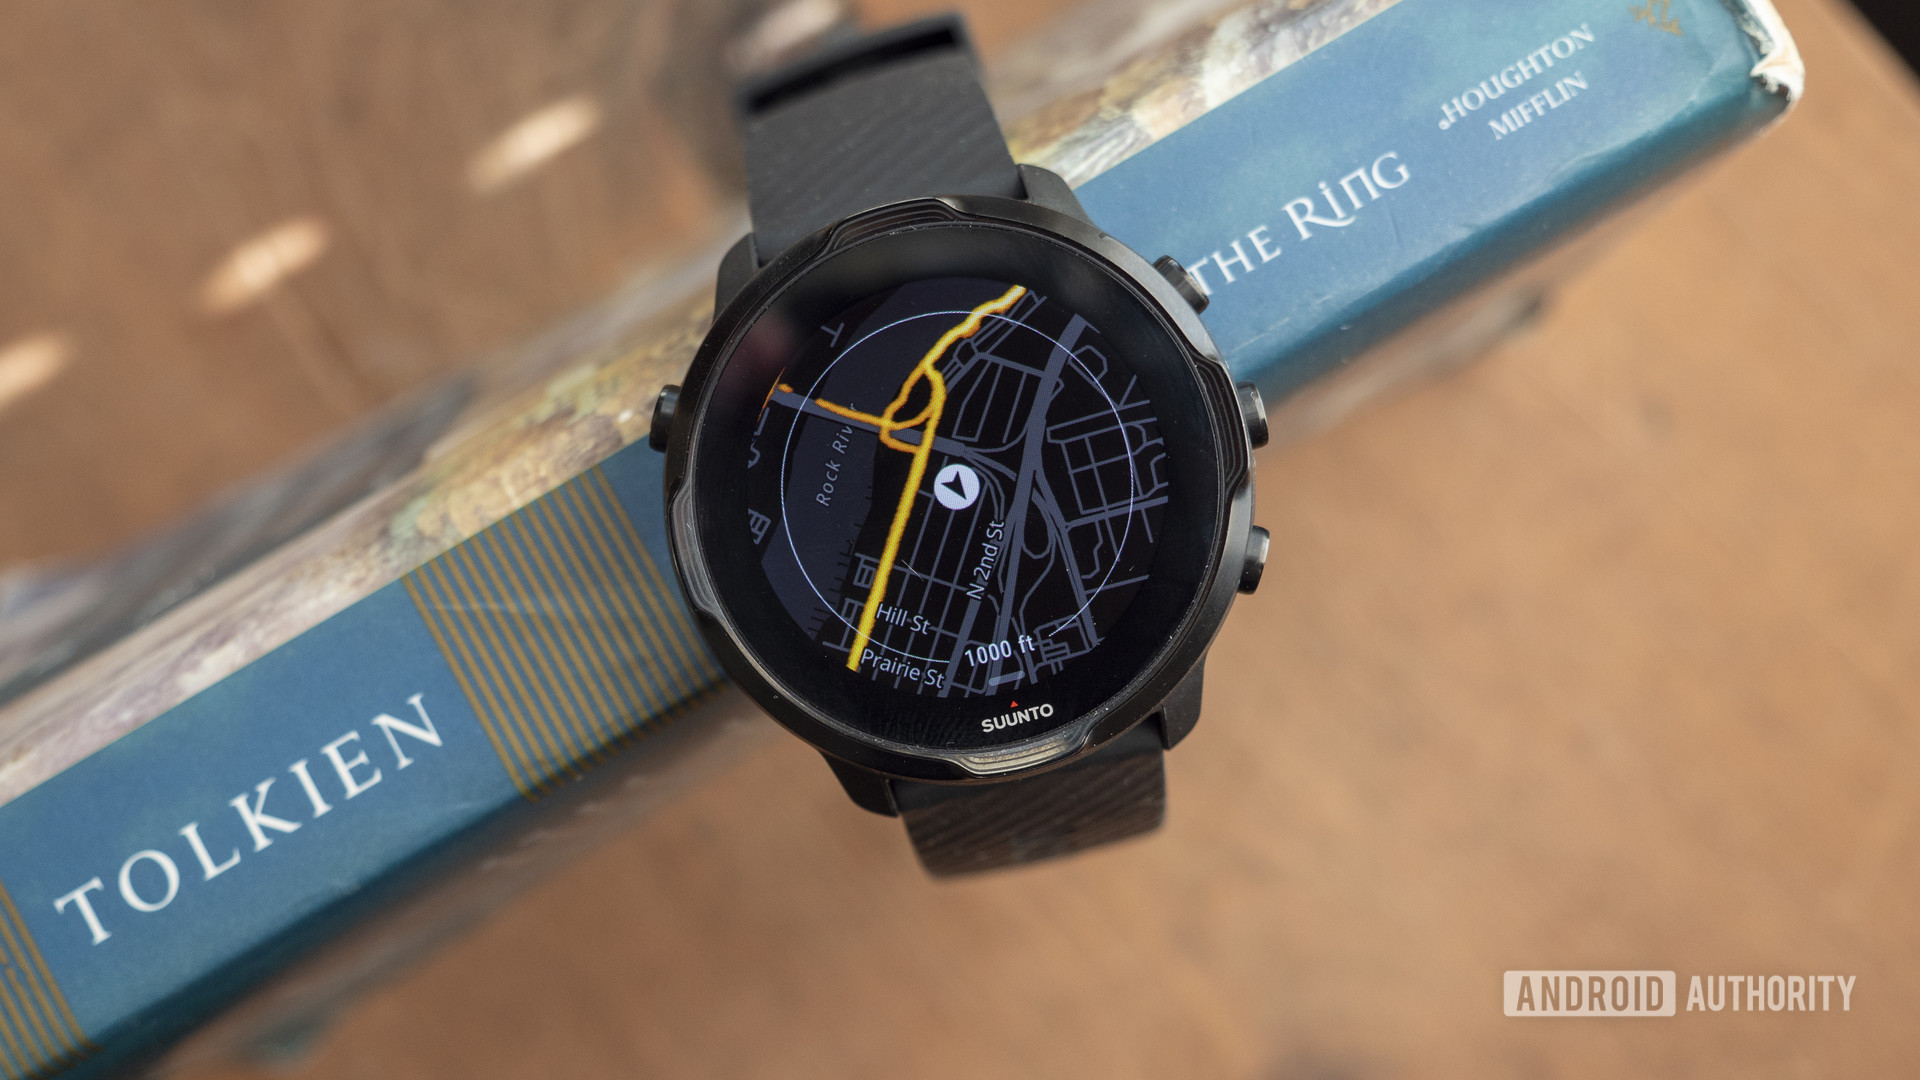 A Suunto 7 displays its heat maps function, a niche fitness-tracking tool on this Wear OS device.